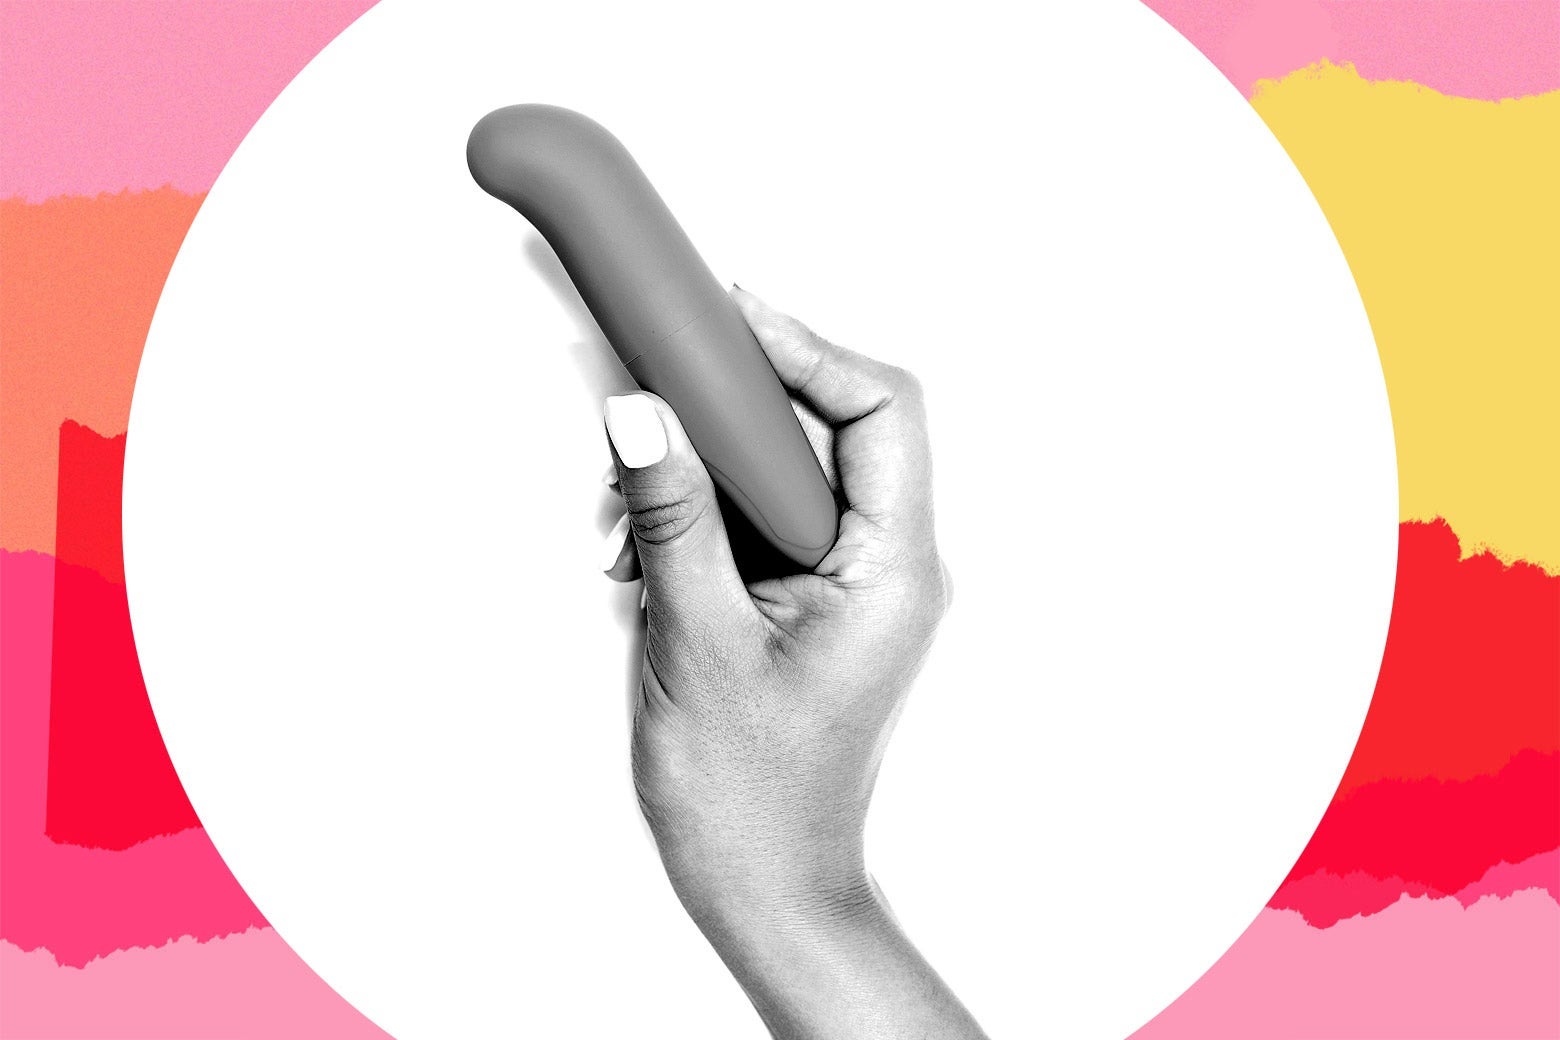 Buying vibrators for teens parenting advice from Care and Feeding.